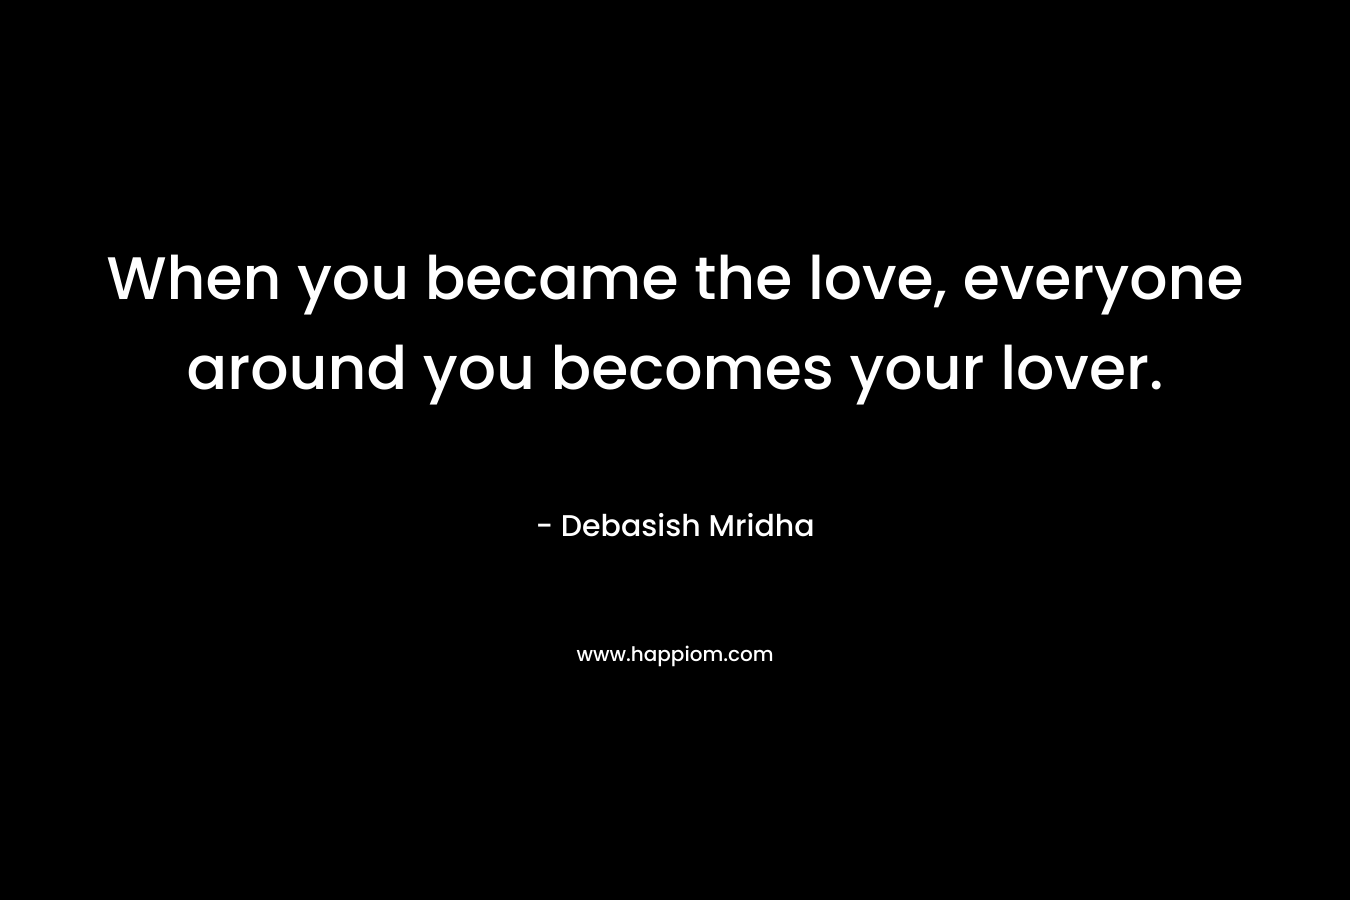 When you became the love, everyone around you becomes your lover.